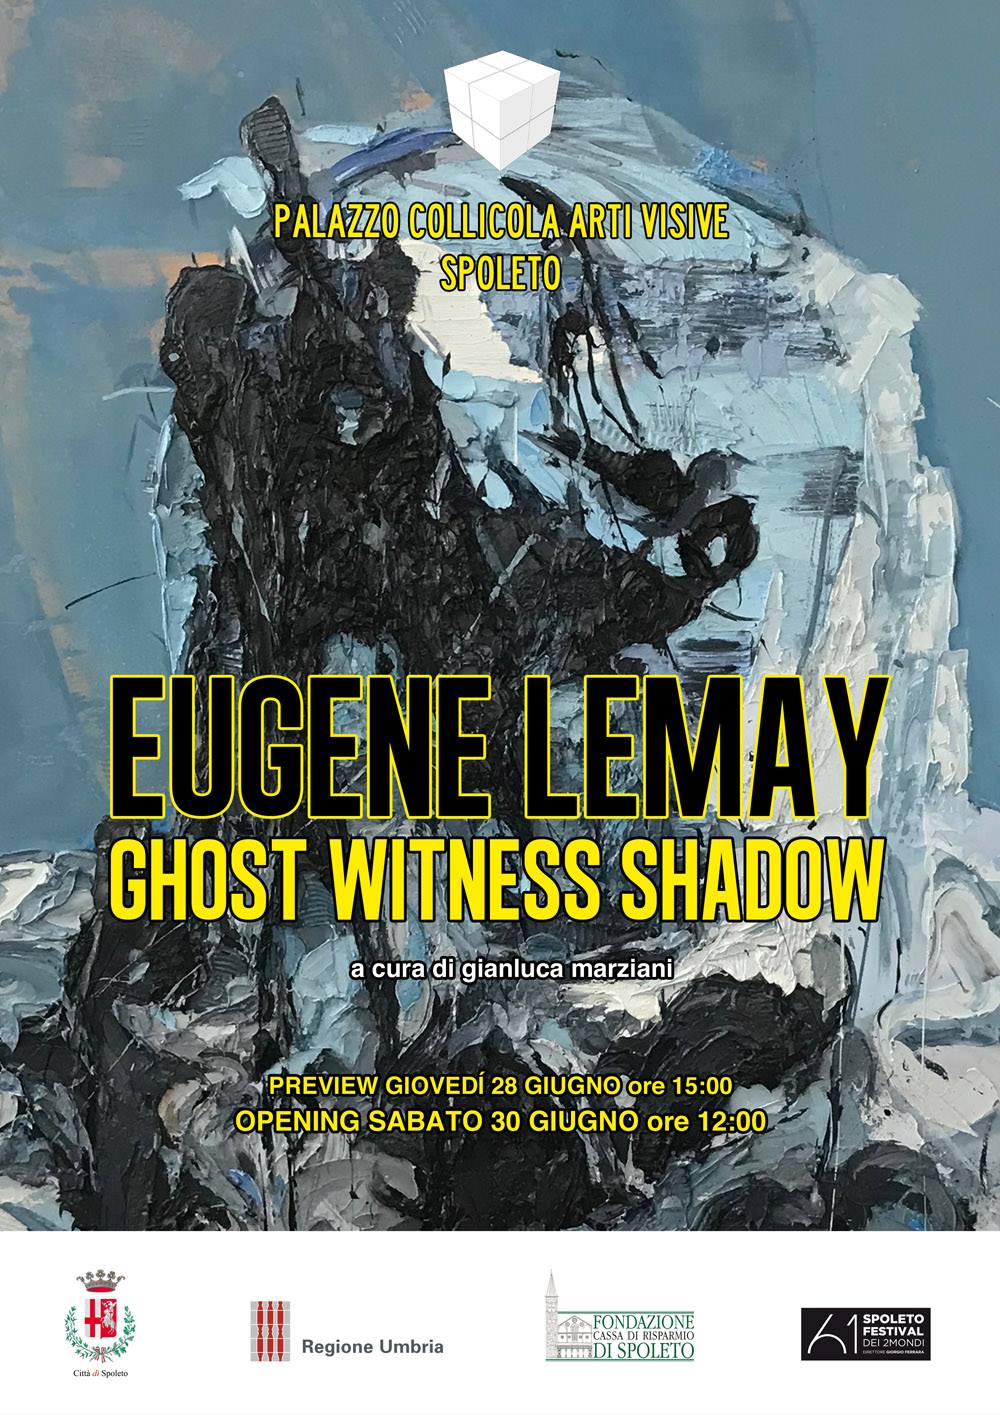 Eugene Lemay – Ghost witness shadow